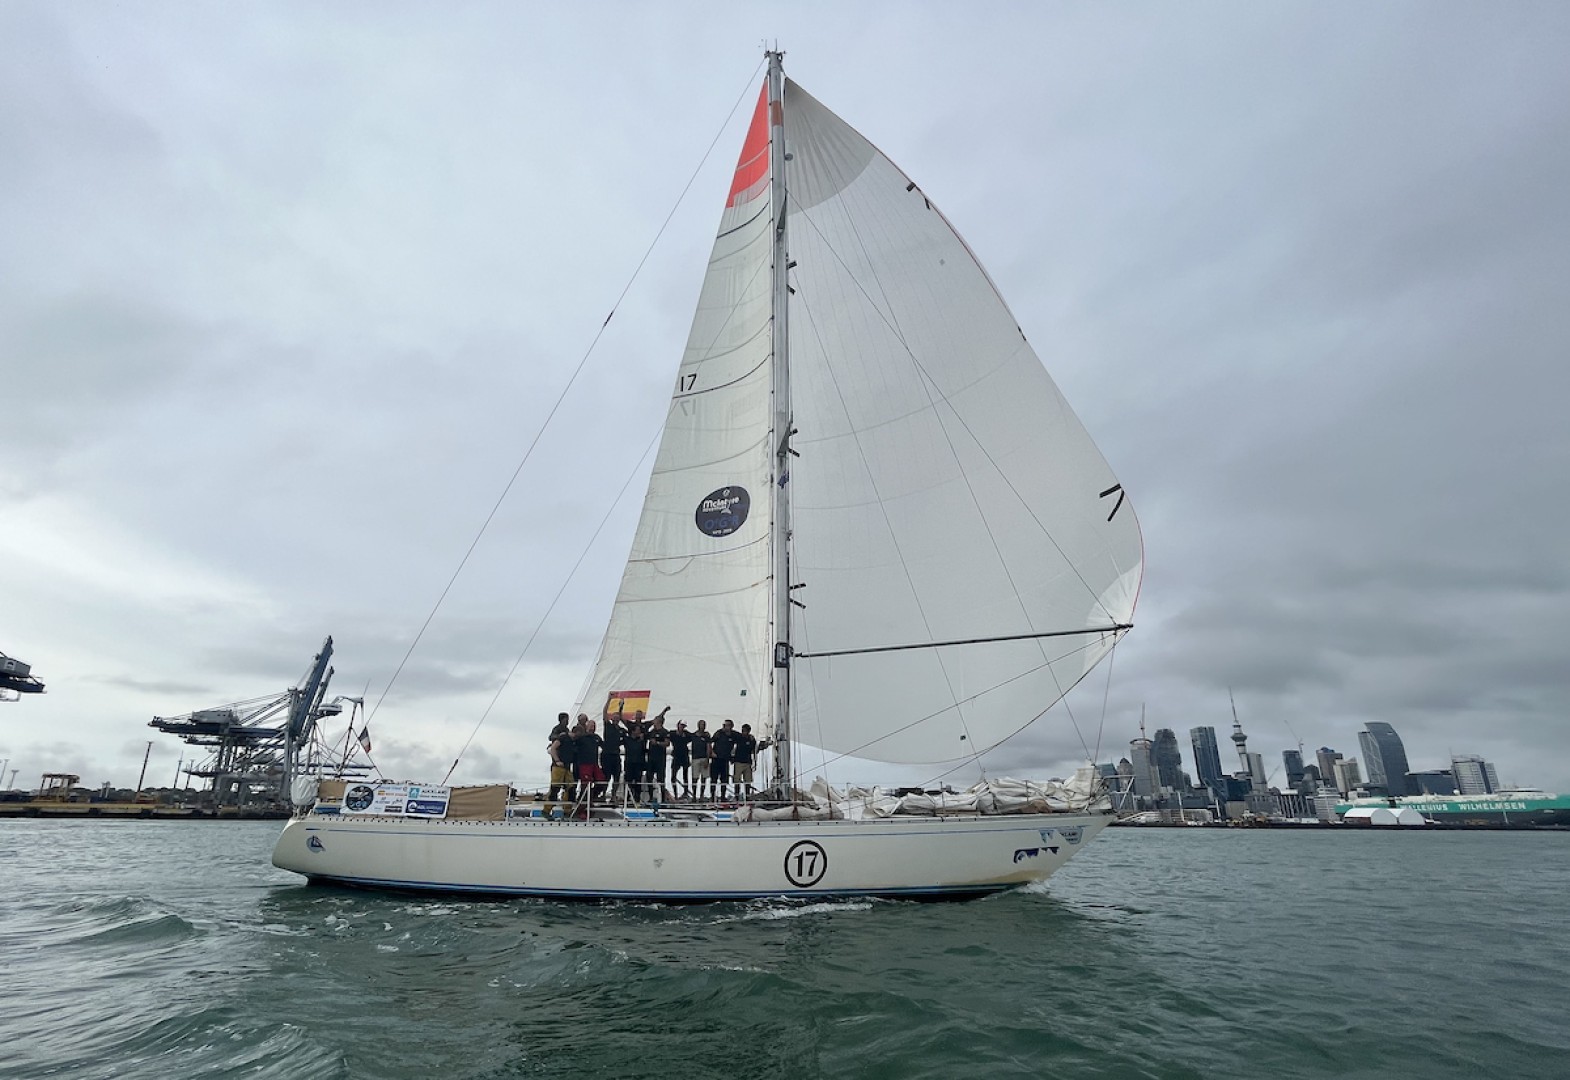 First prize for the happiest crew in the fleet arriving in Auckland! Credit: OGR2023/Jacqueline Kavanagh